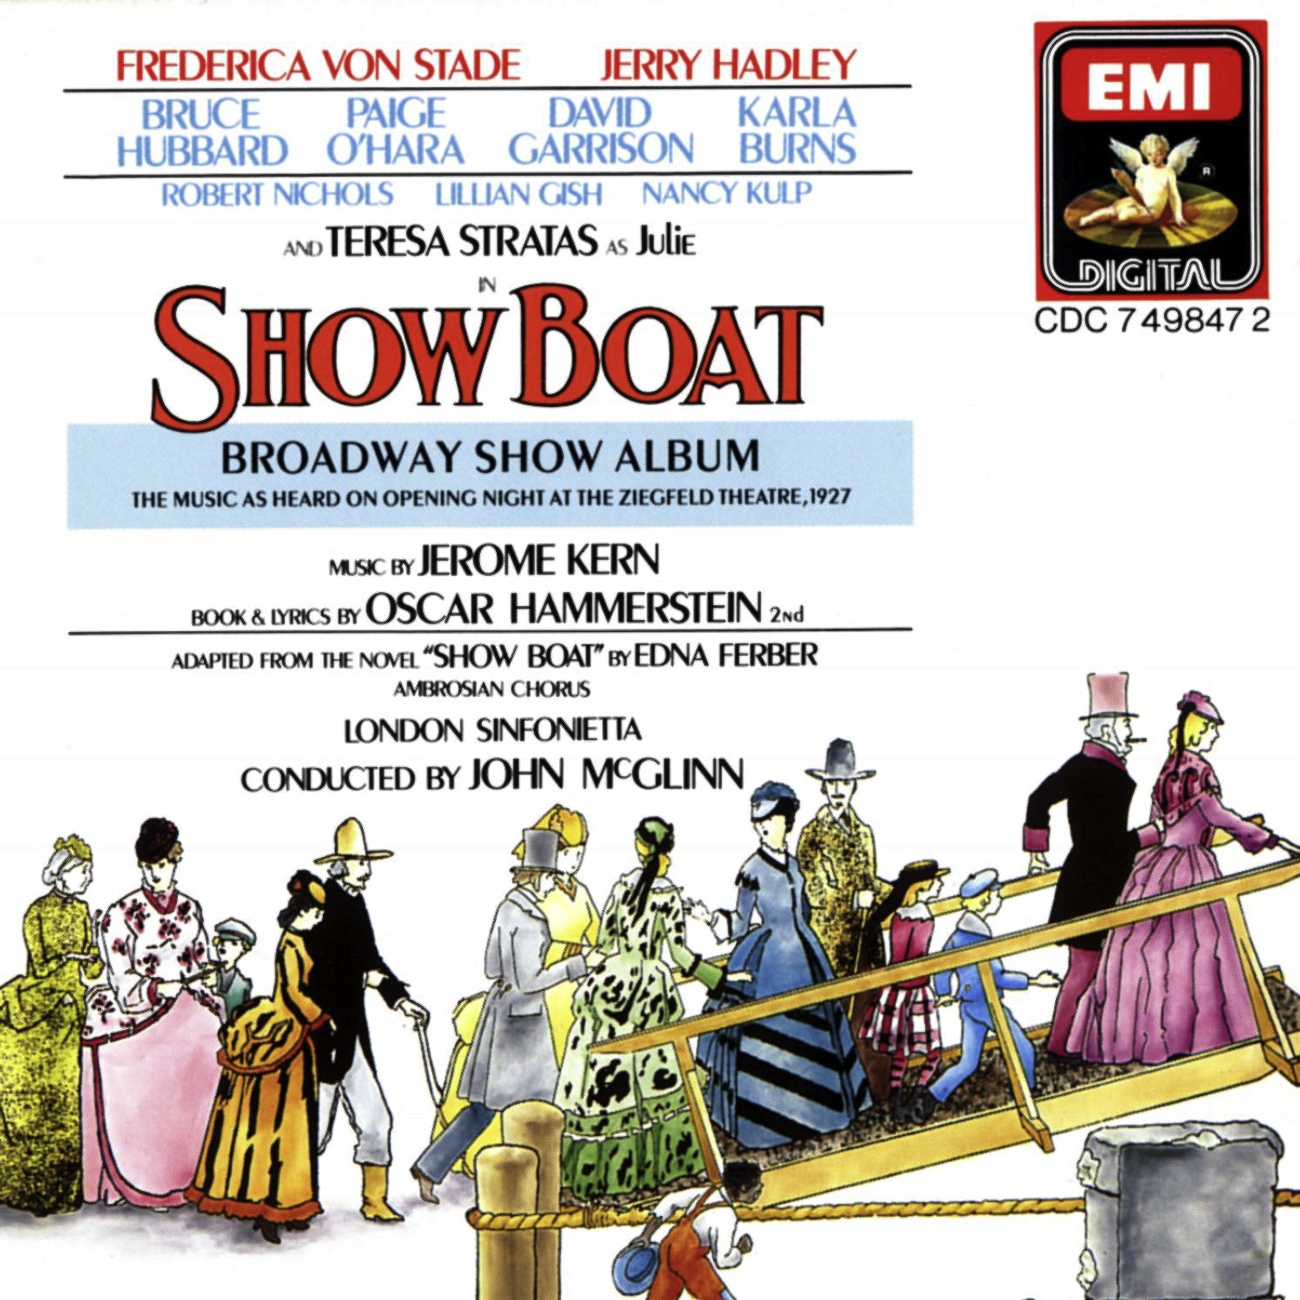 Show Boat, ACT 2, Scene 1: At the fair